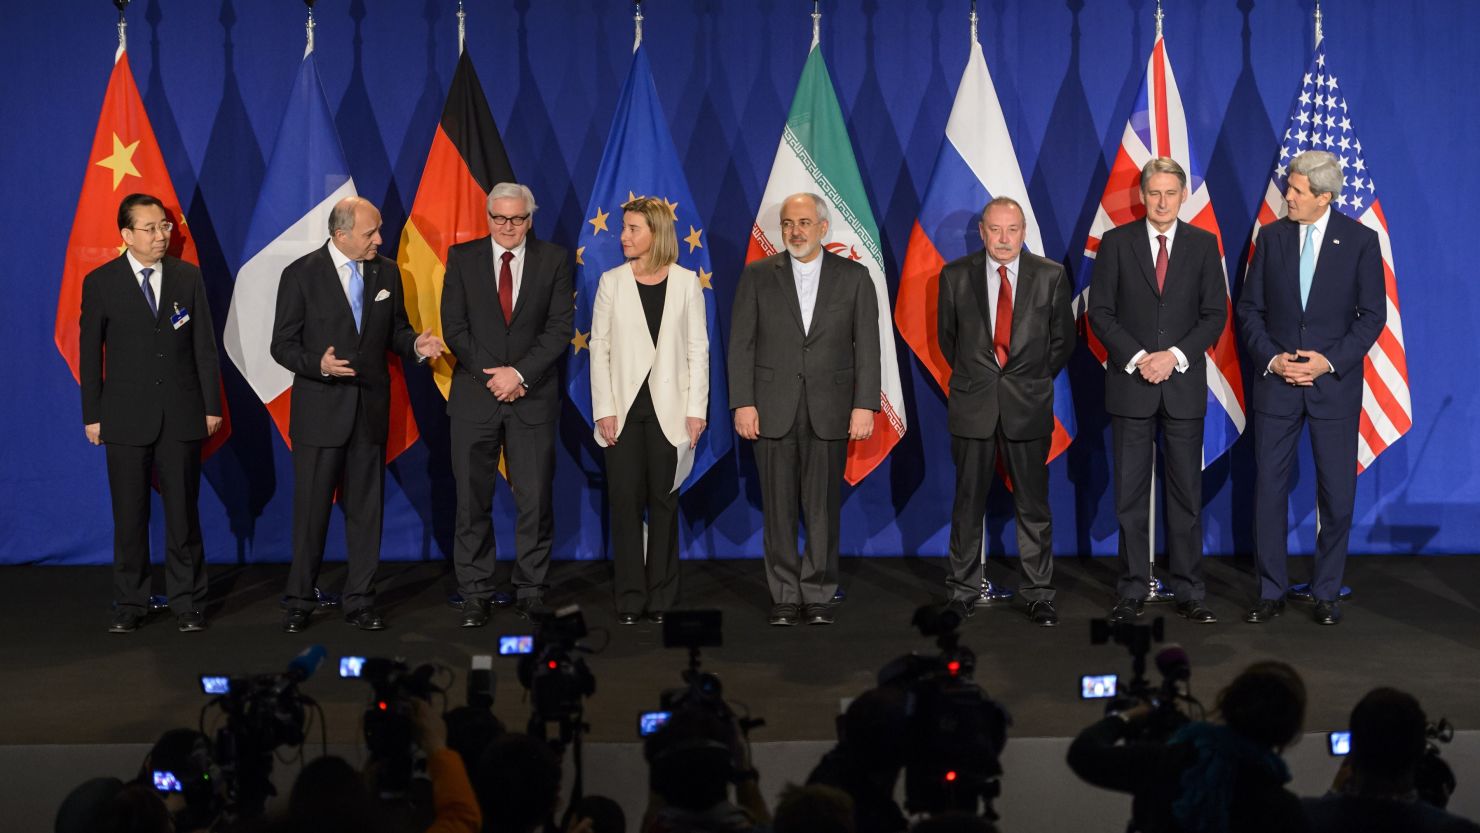 Representatives of Iran and officials from China, France, Germany, the European Union, Russia, the UK and the US announced their framework deal in 2015.